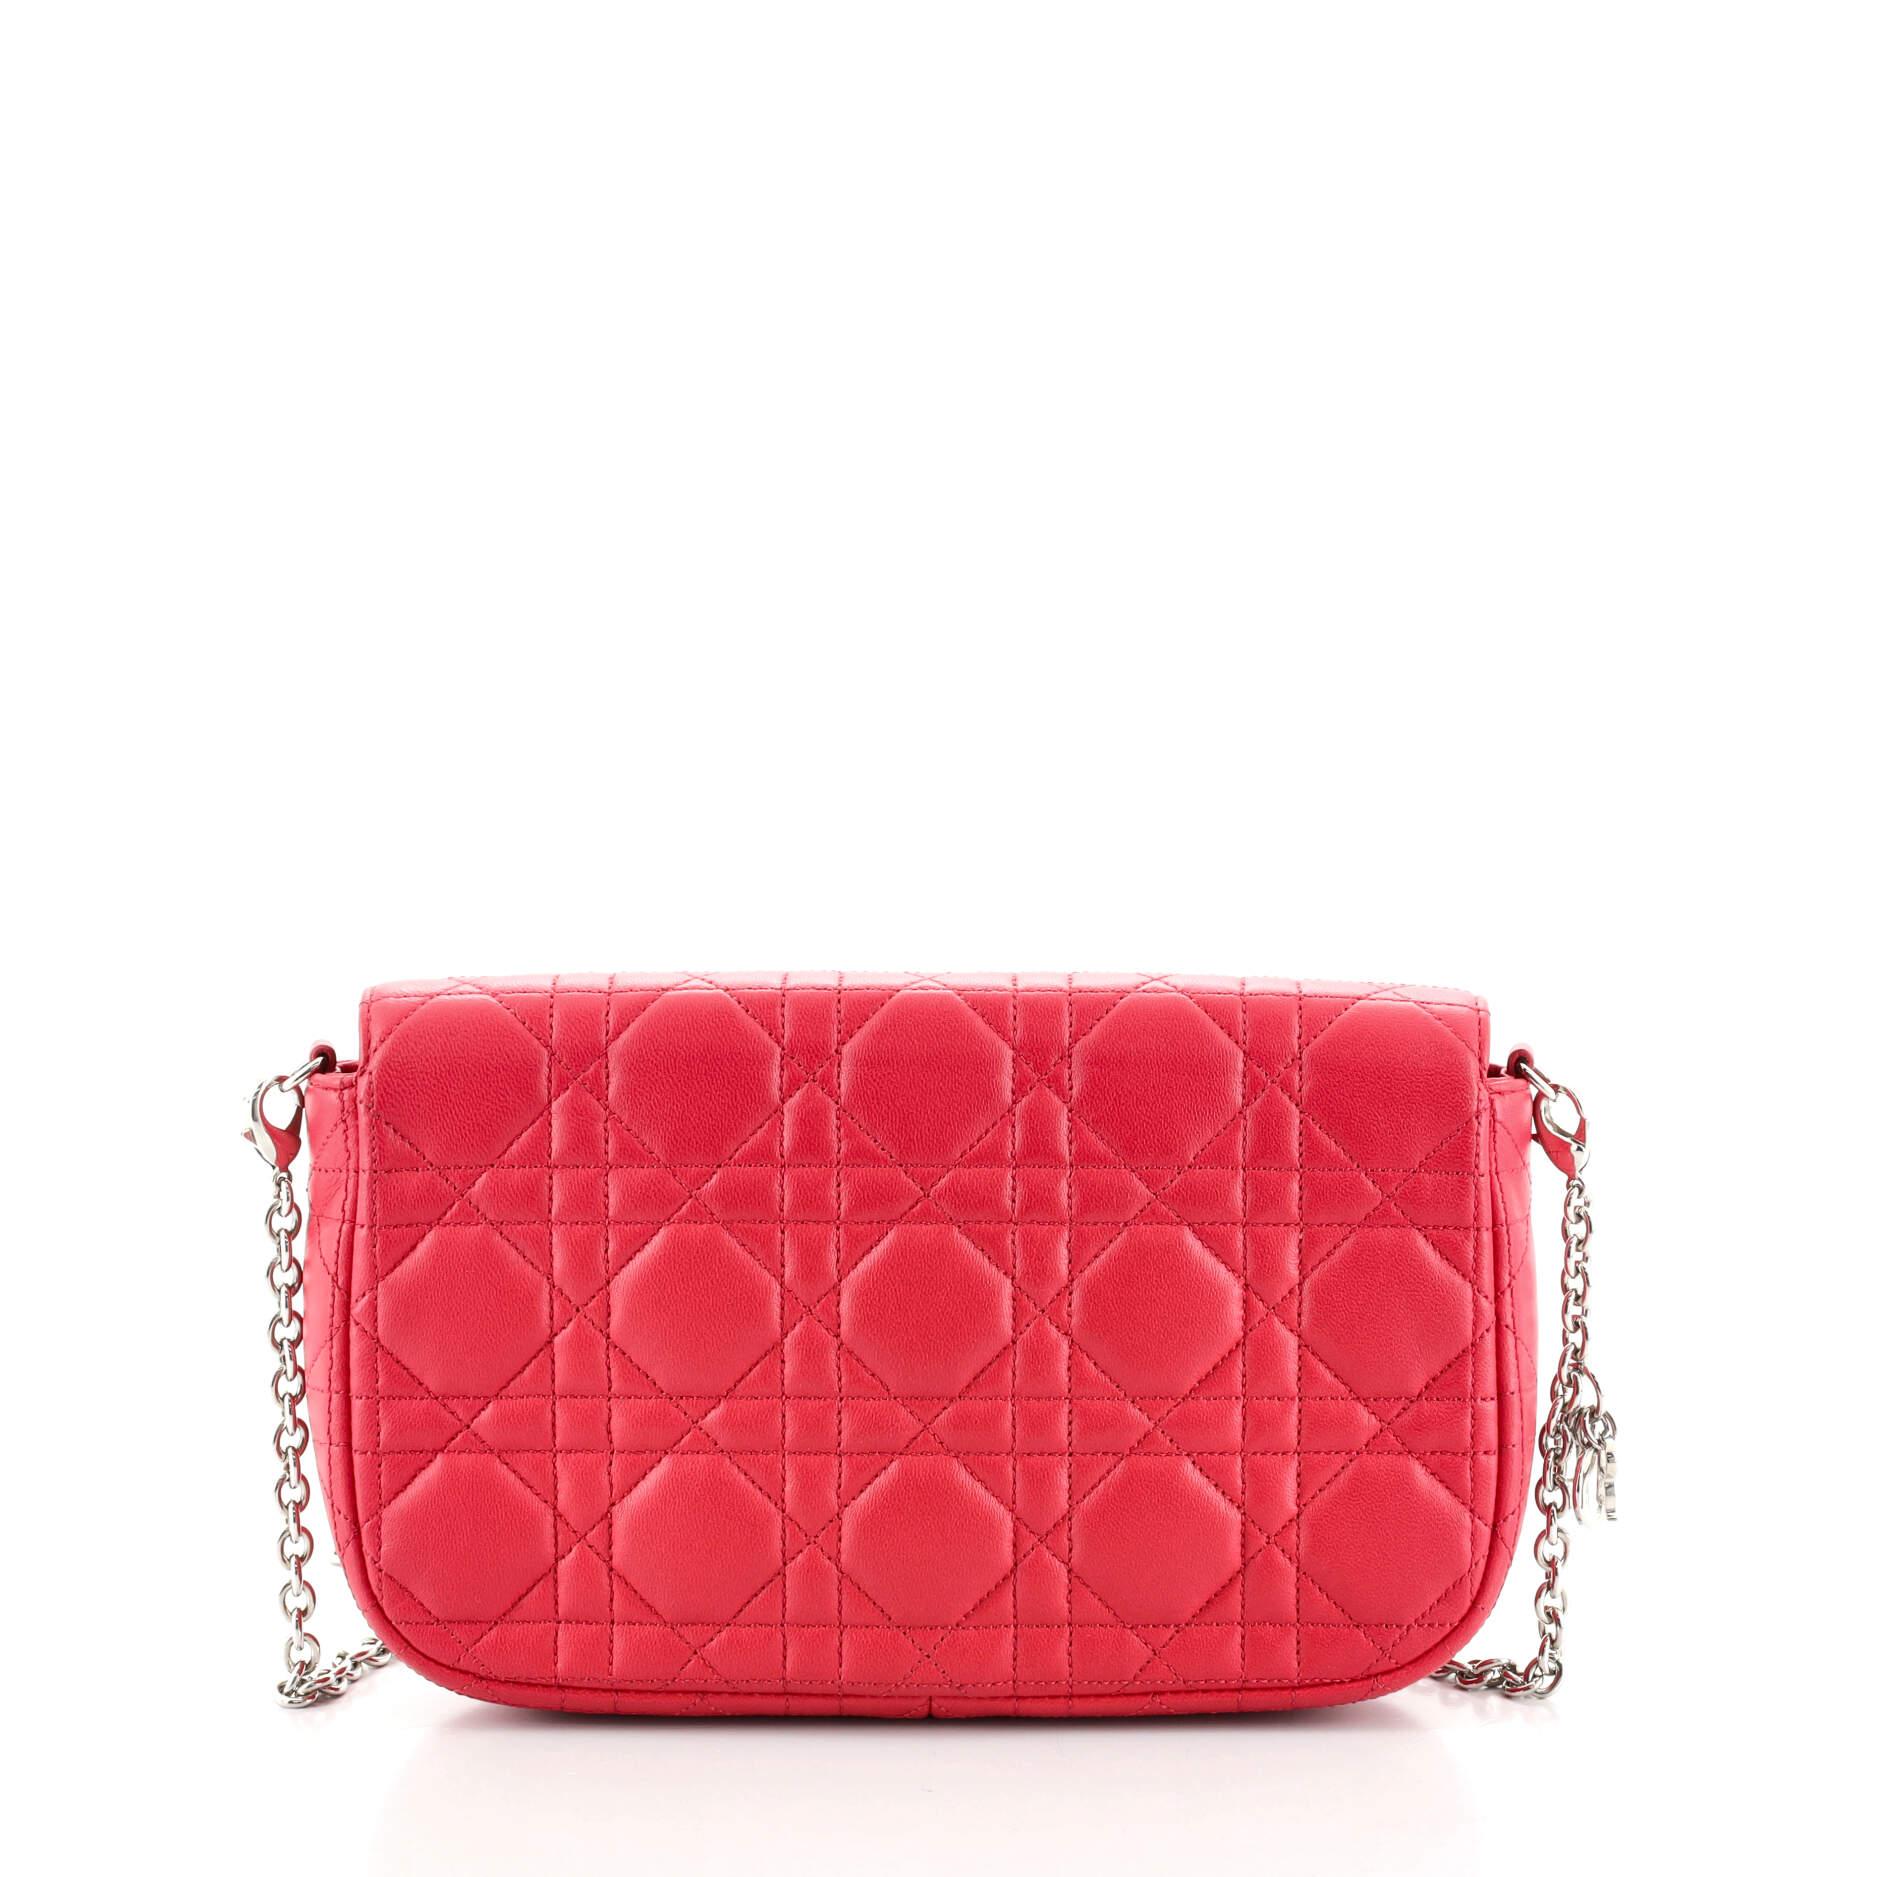 Red Christian Dior Miss Dior Promenade Bag Cannage Quilt Lambskin